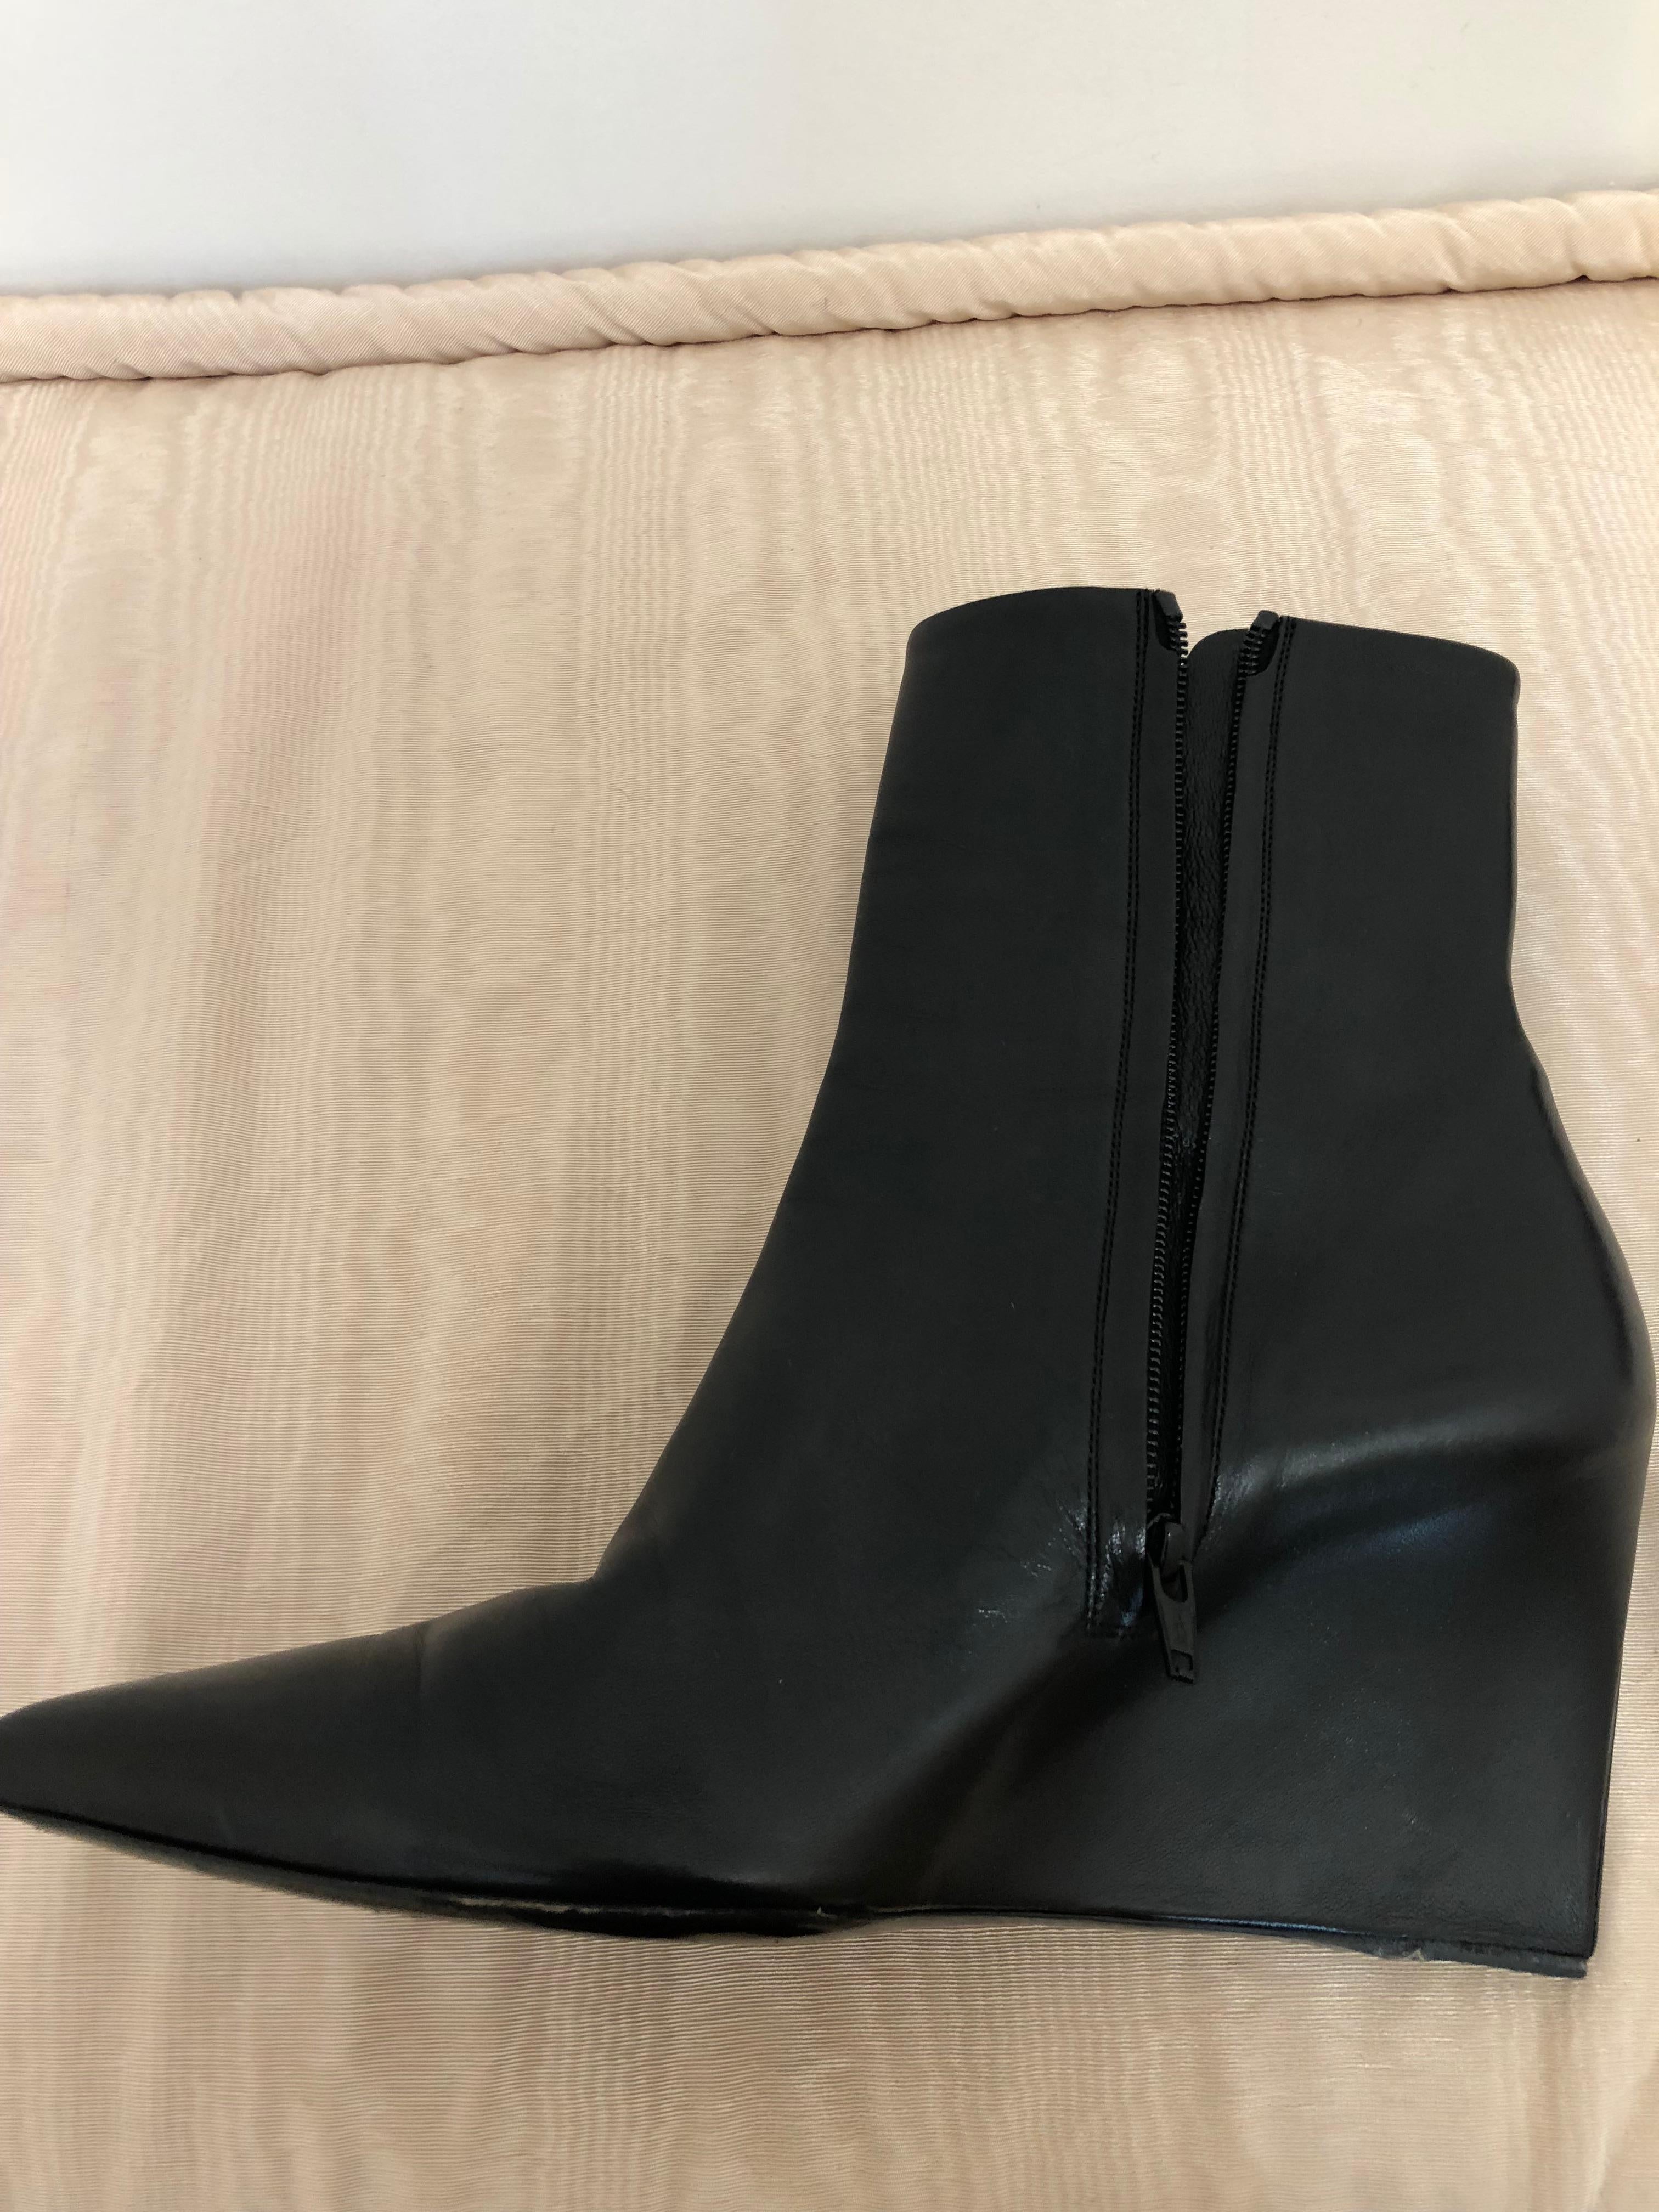 These Balenciaga black leather wedges are beautifully crafted of a single layer which encases both the upper and heel. This is a gorgeous and very sleek pair of booties with a pointed top and side zip closure.  We believe they are from the 2015